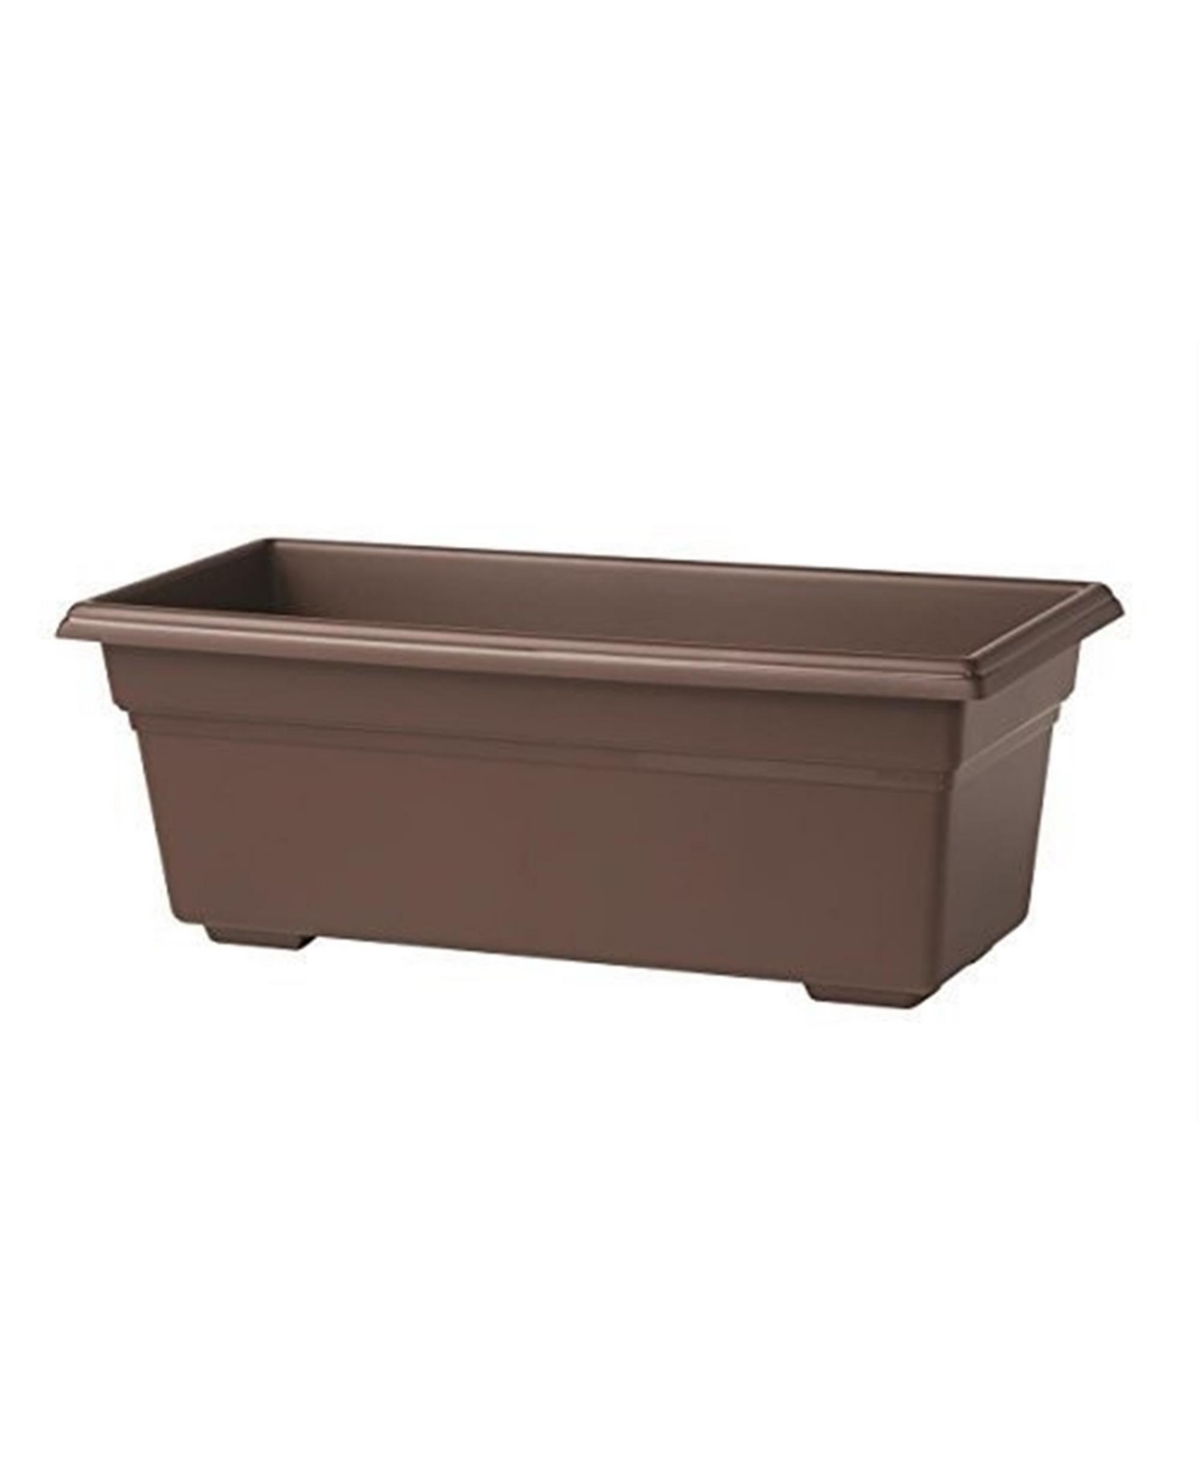 (#16193) Countryside Flower Box Planter, Brown 18" - Brown